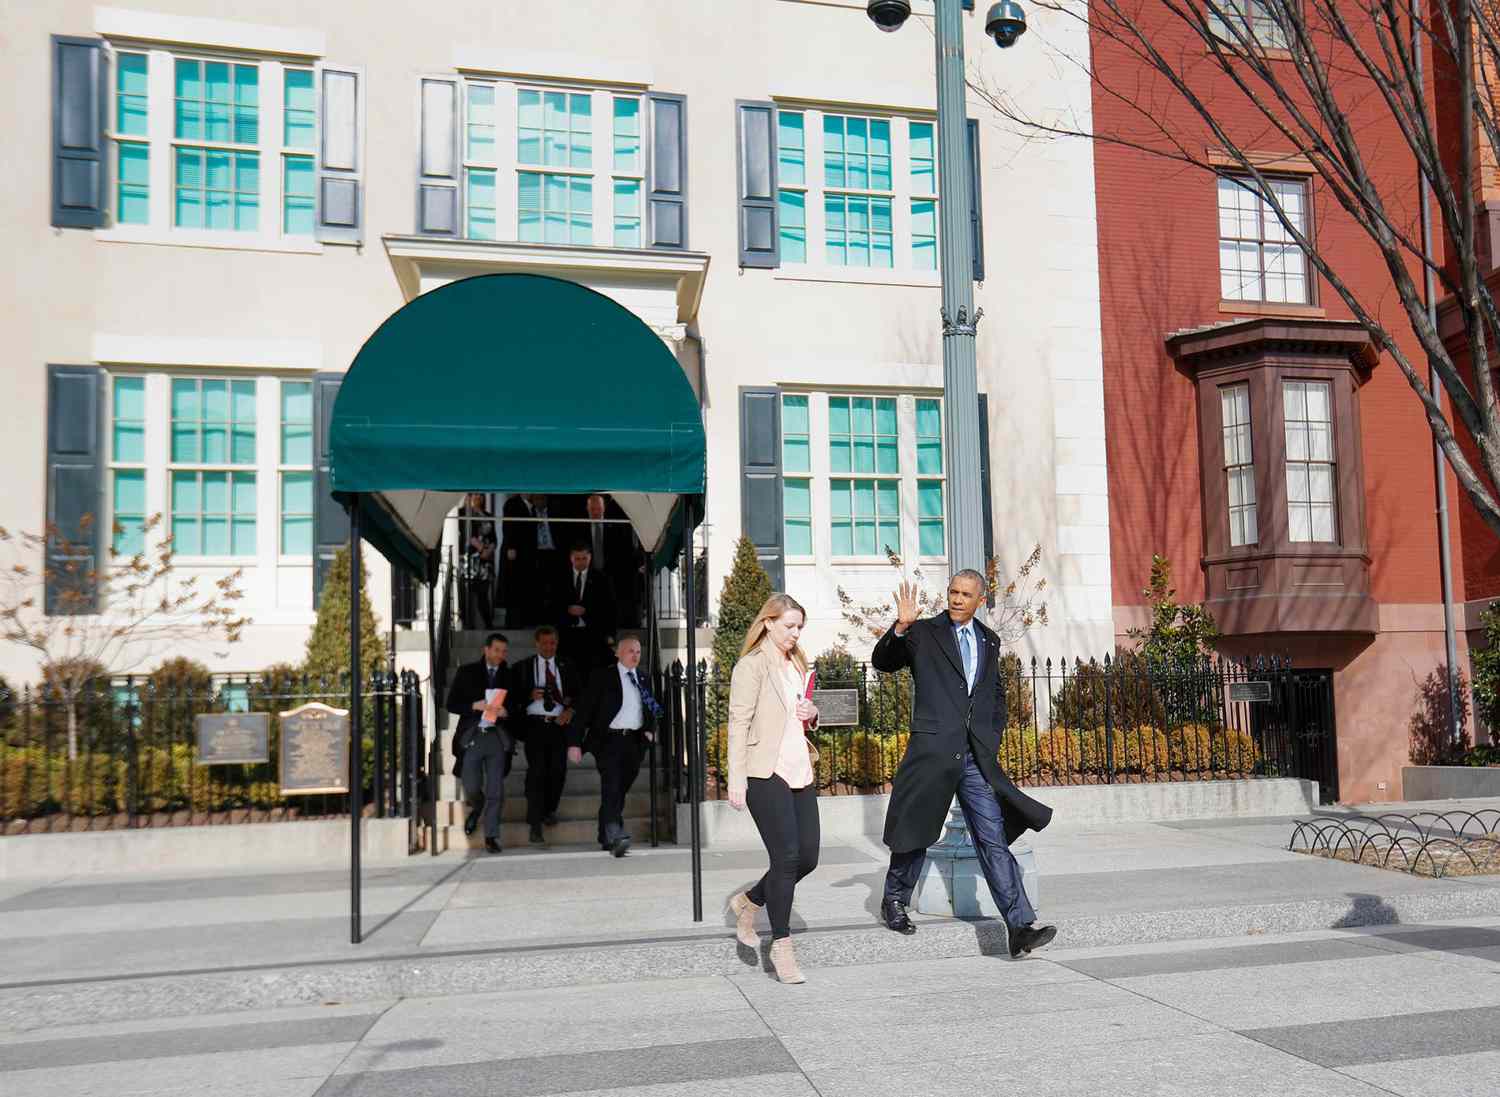 Barack Obama, Kristie Canegallo President Barack Obama waves to members of the media as he walks out of the Blair House and toward the White House in Washington